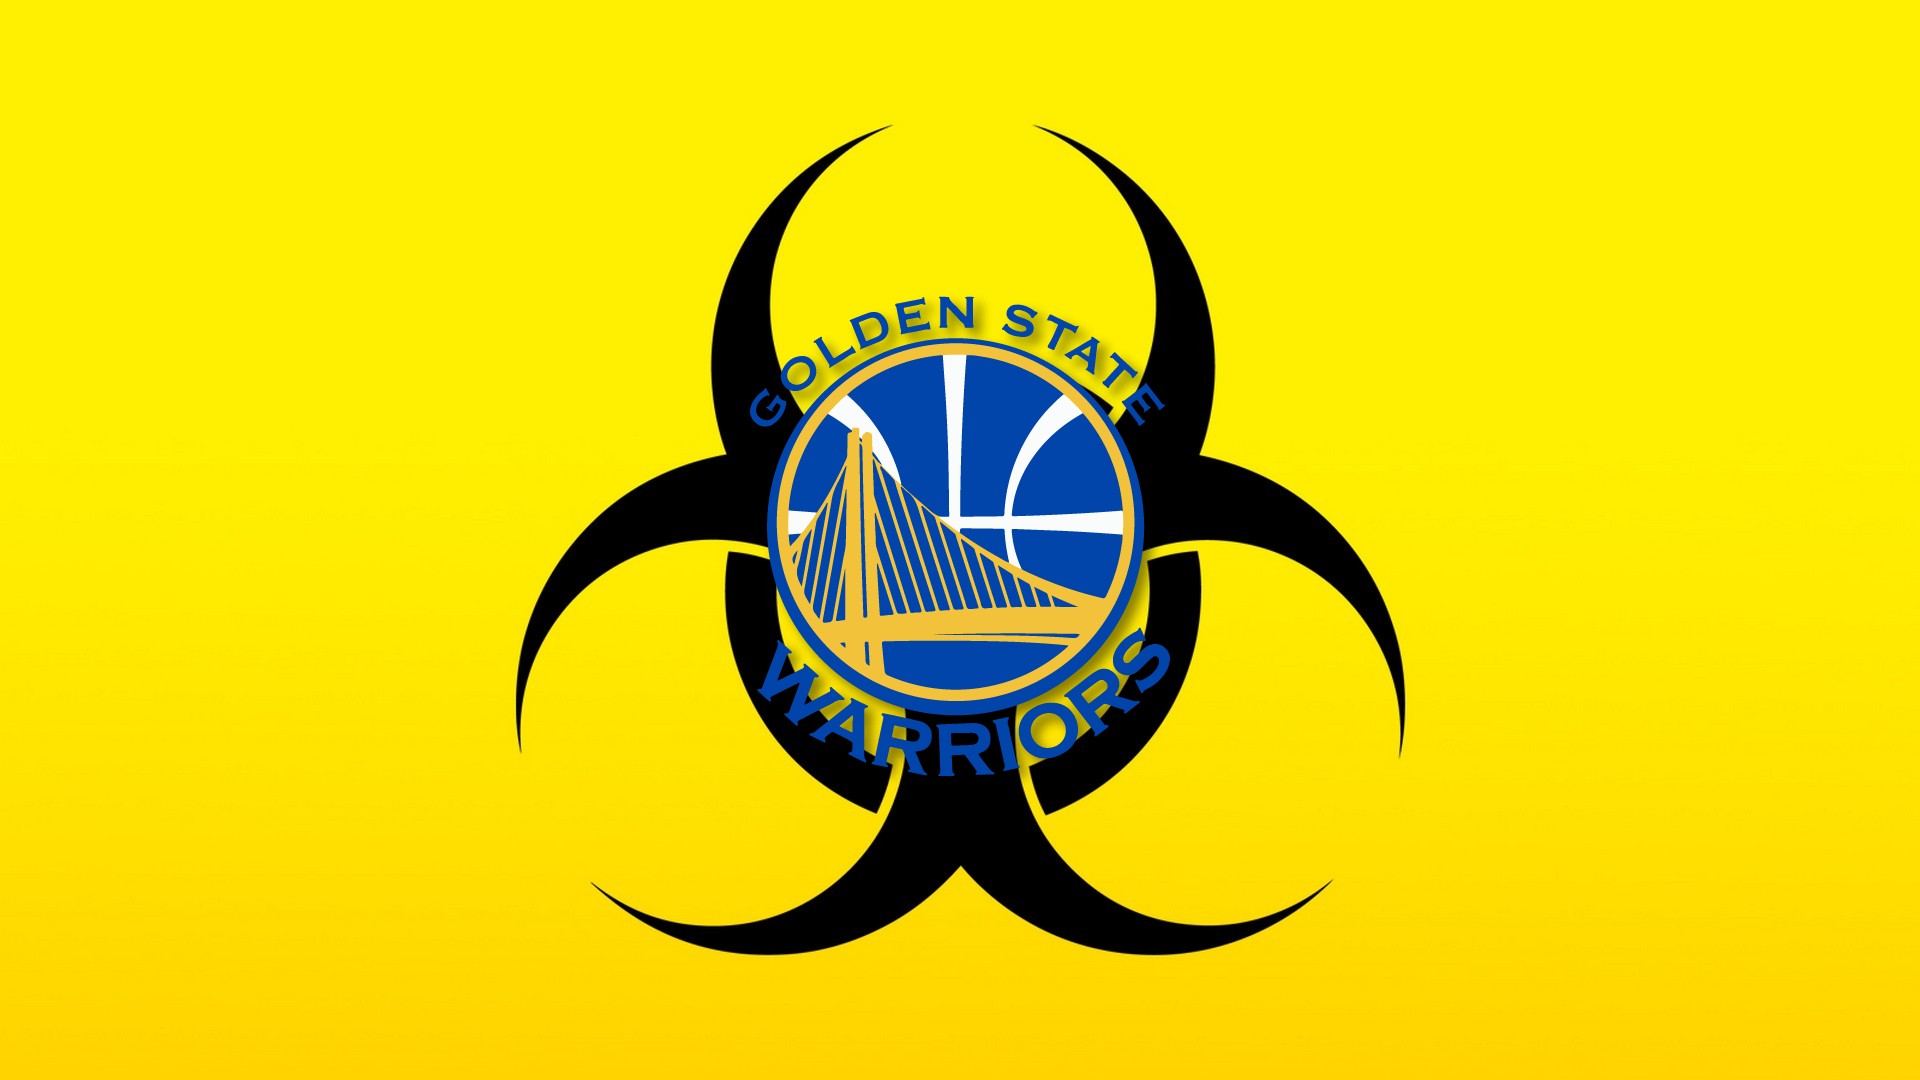 Golden State Warriors NBA For Mac Wallpaper with image dimensions 1920x1080 pixel. You can make this wallpaper for your Desktop Computer Backgrounds, Windows or Mac Screensavers, iPhone Lock screen, Tablet or Android and another Mobile Phone device